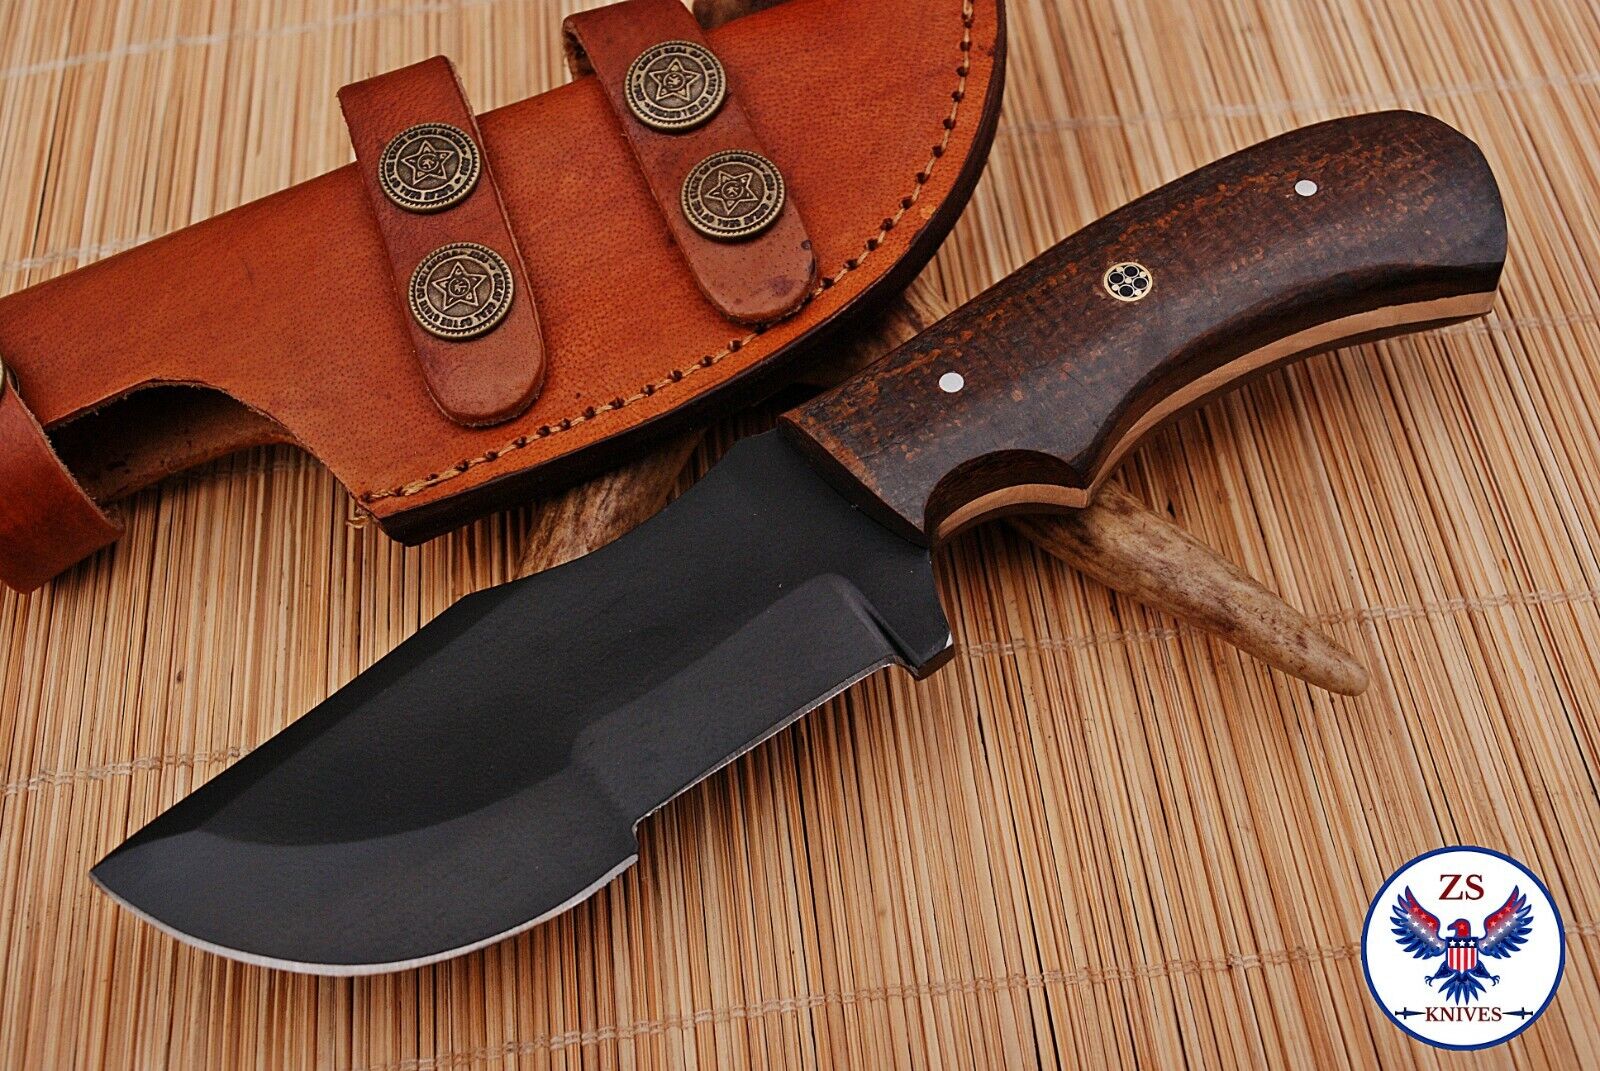 TRACKER 1095 CARBON STEEL TRACKER HUNTING KNIFE WITH MICARTA HANDLE - ZS 84